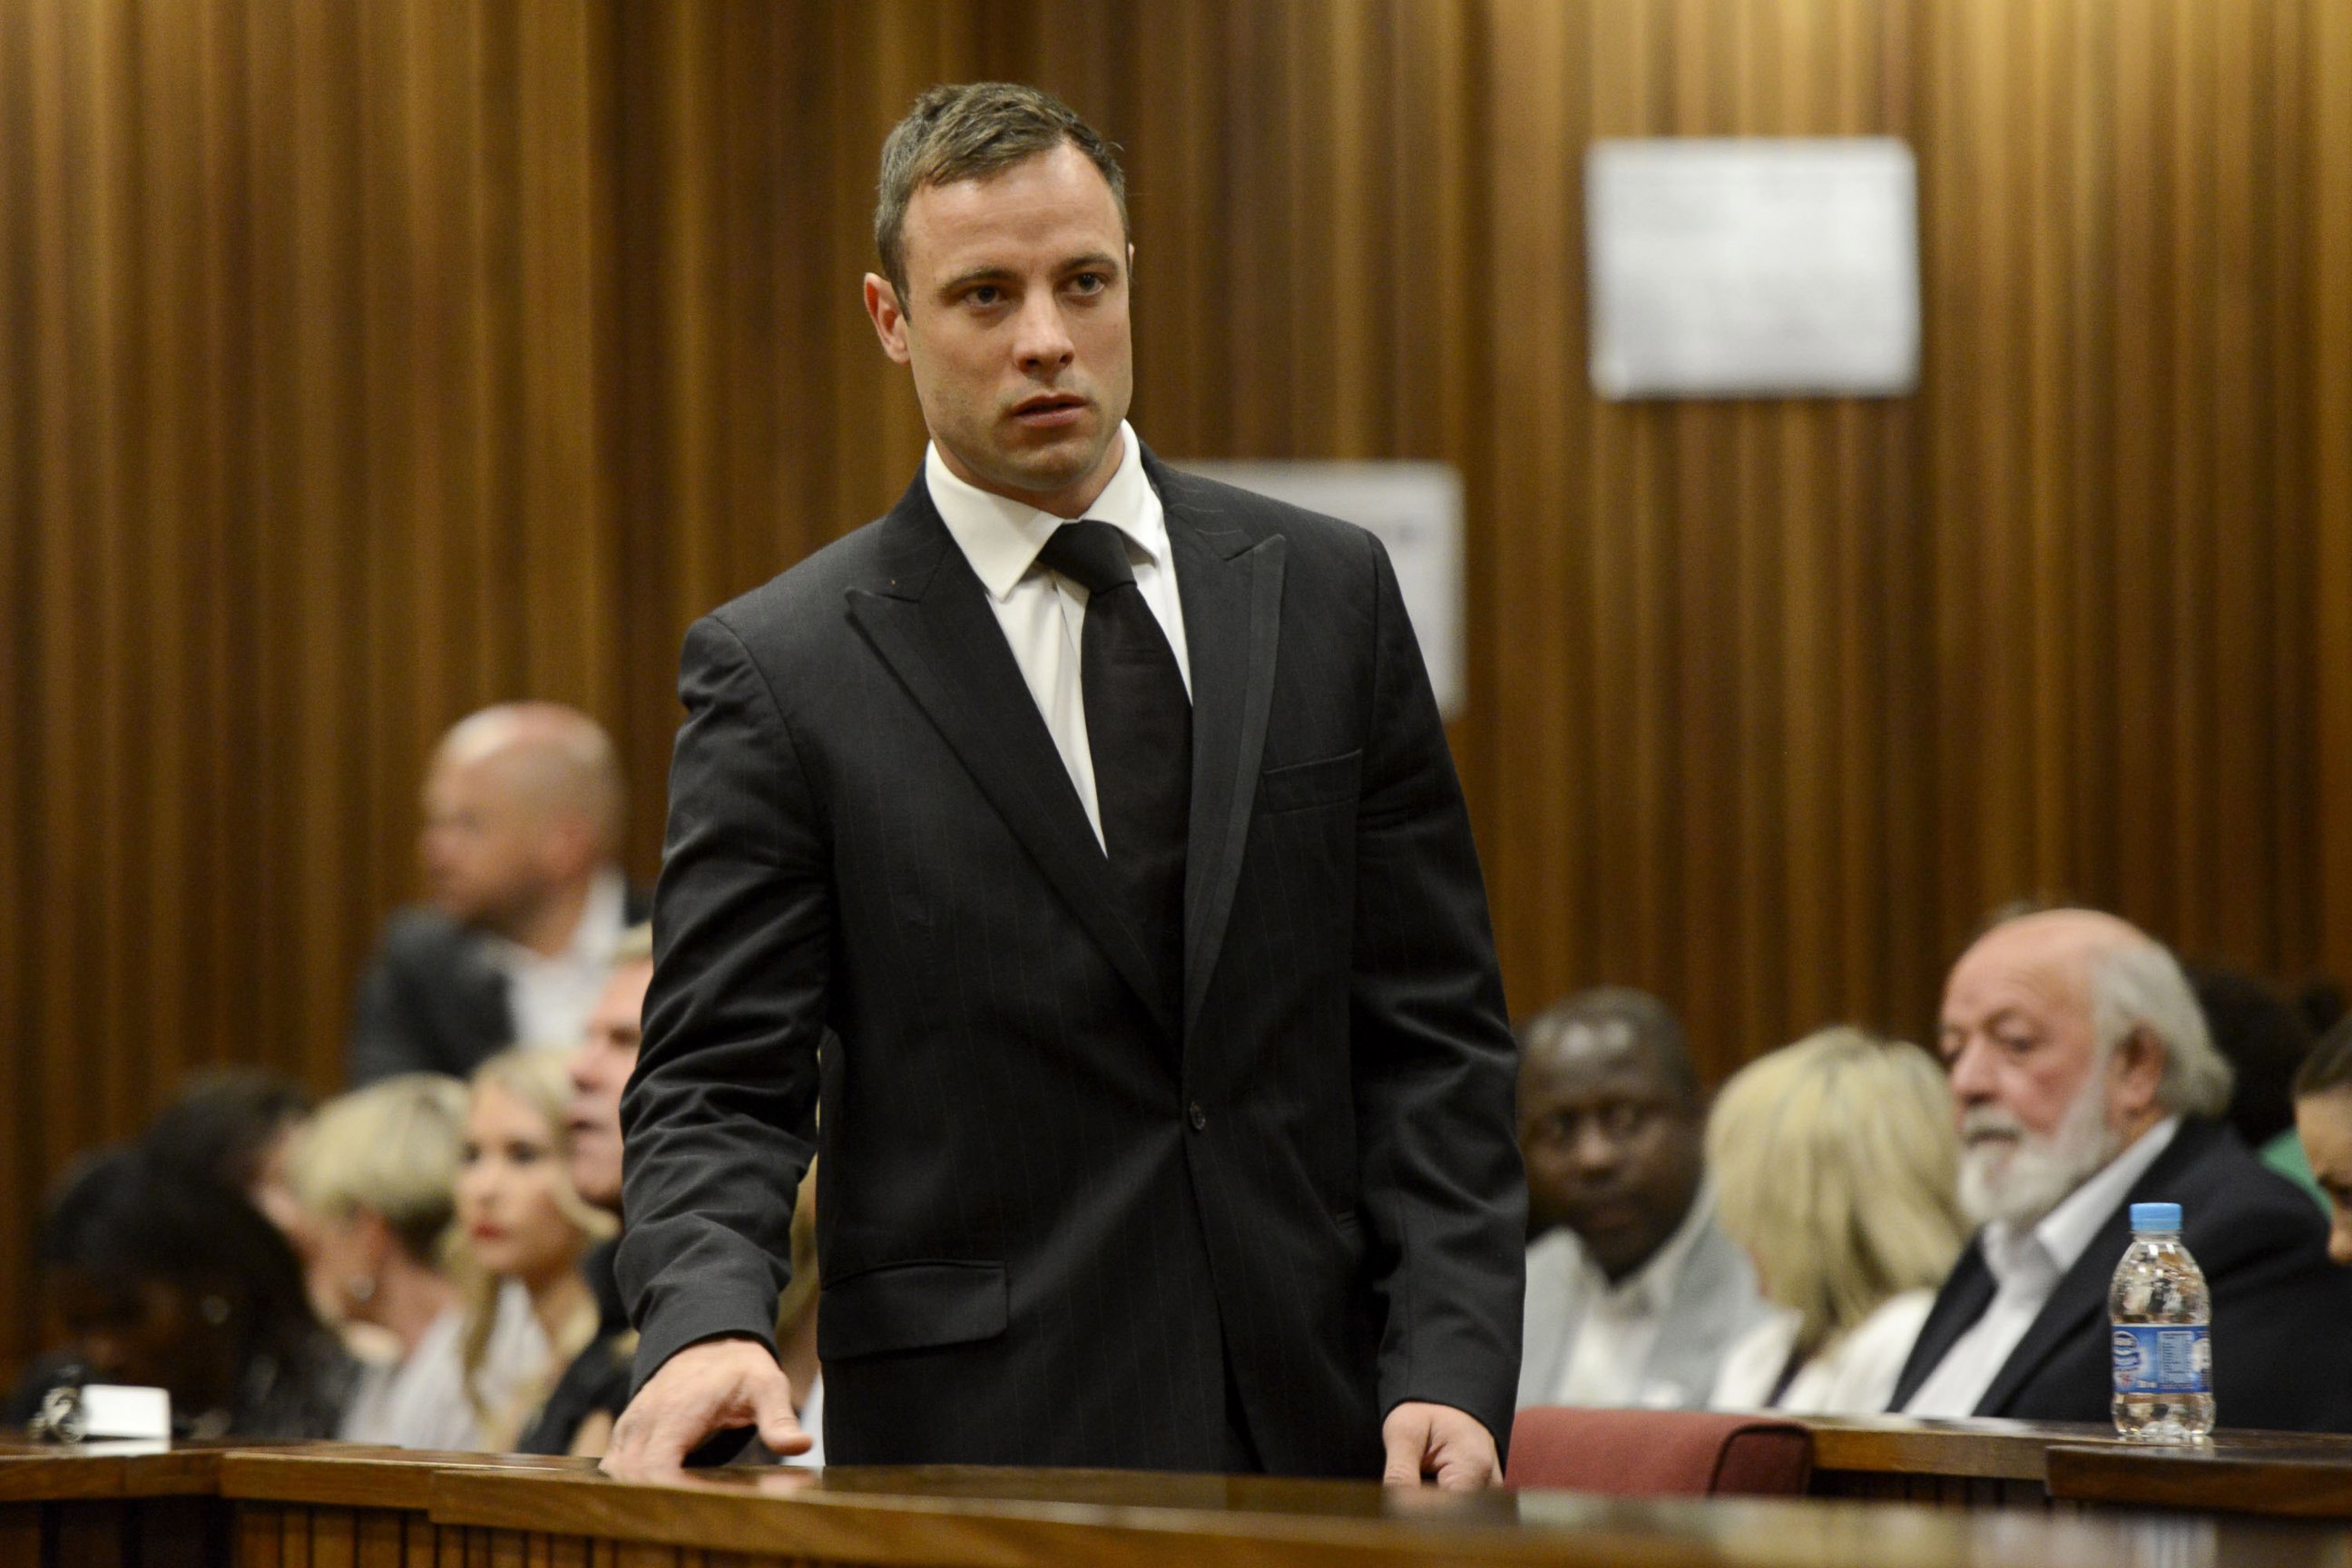 PHOTO: Oscar Pistorius is pictured in court on Oct. 21, 2014, in Pretoria, South Africa.